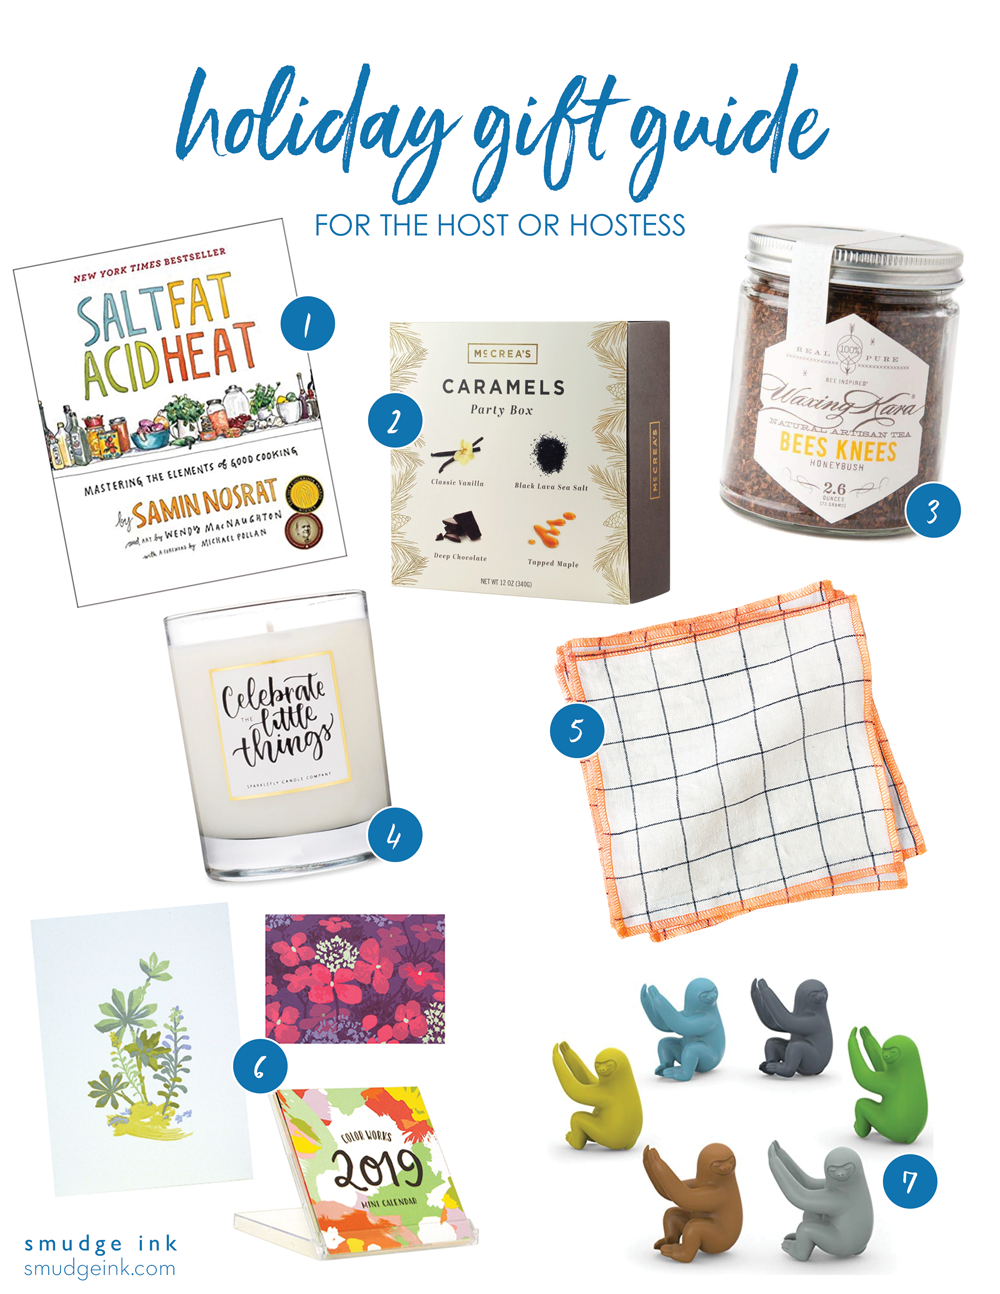 2018 Holiday Gift Guide for the Host or Hostess by Smudge Ink